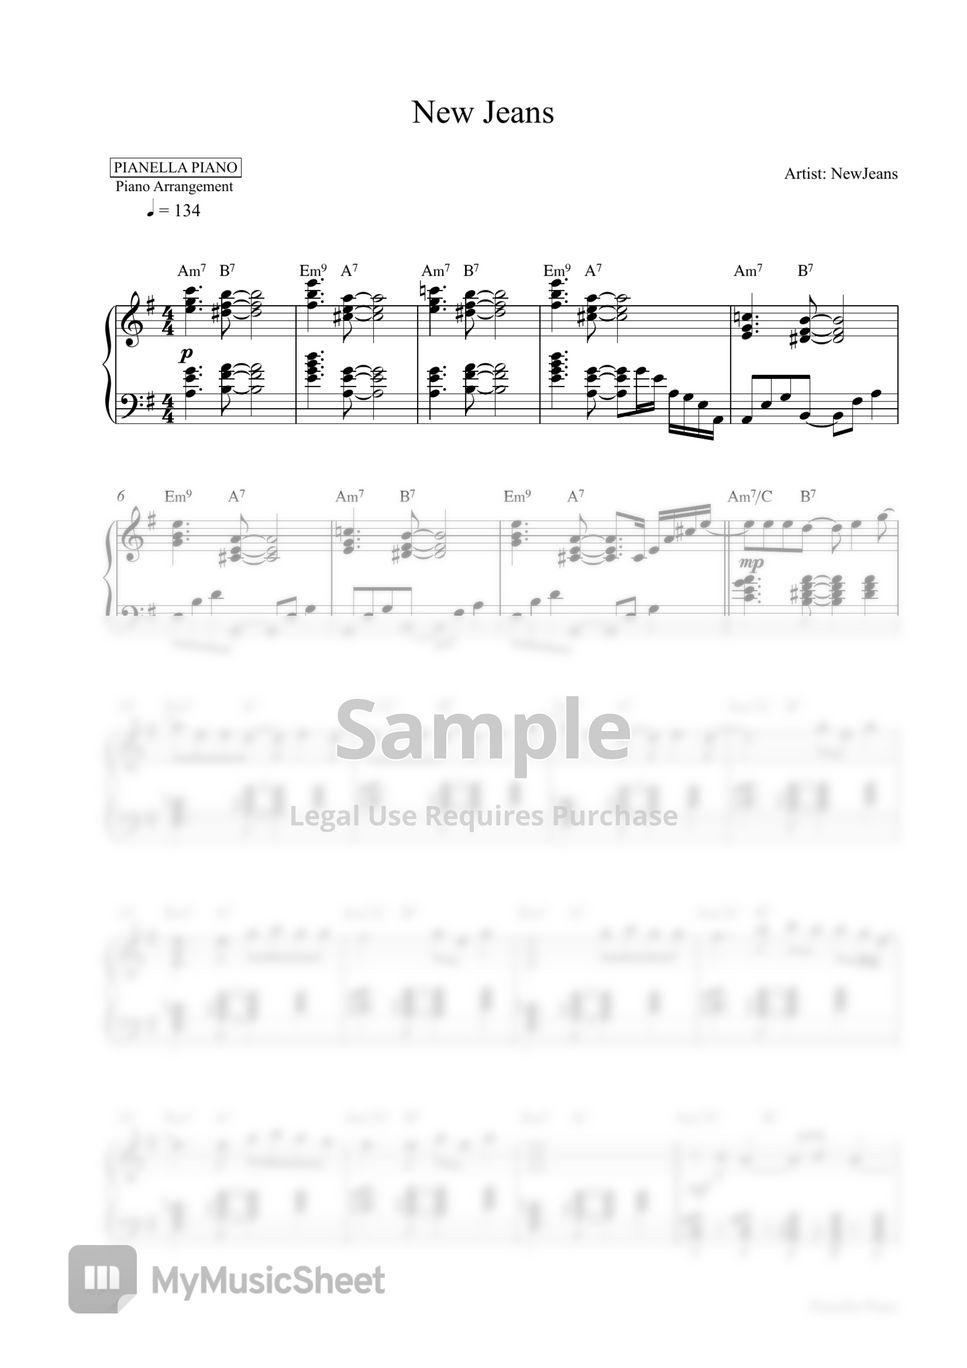 NewJeans - New Jeans (PIANO SHEET) by Pianella Piano